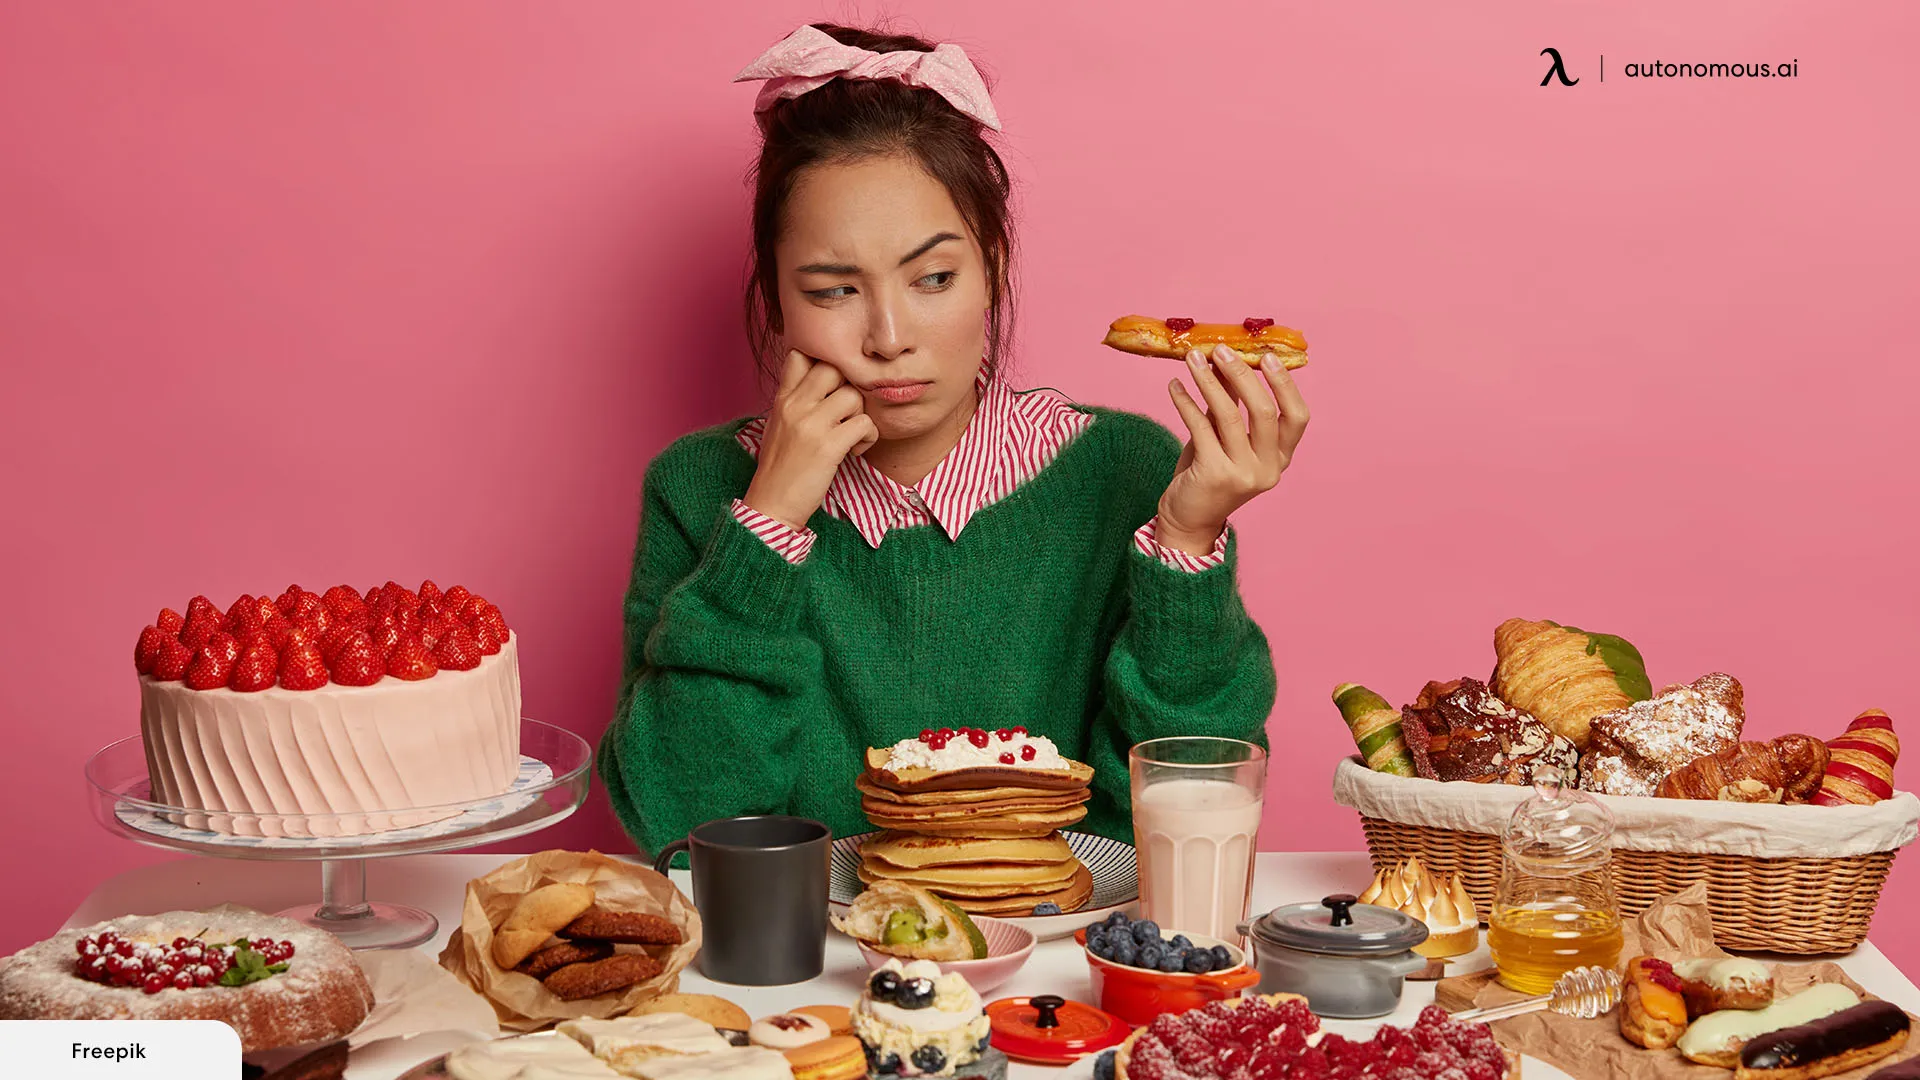 Mindful Eating: How to Break a Bad Eating Habit?